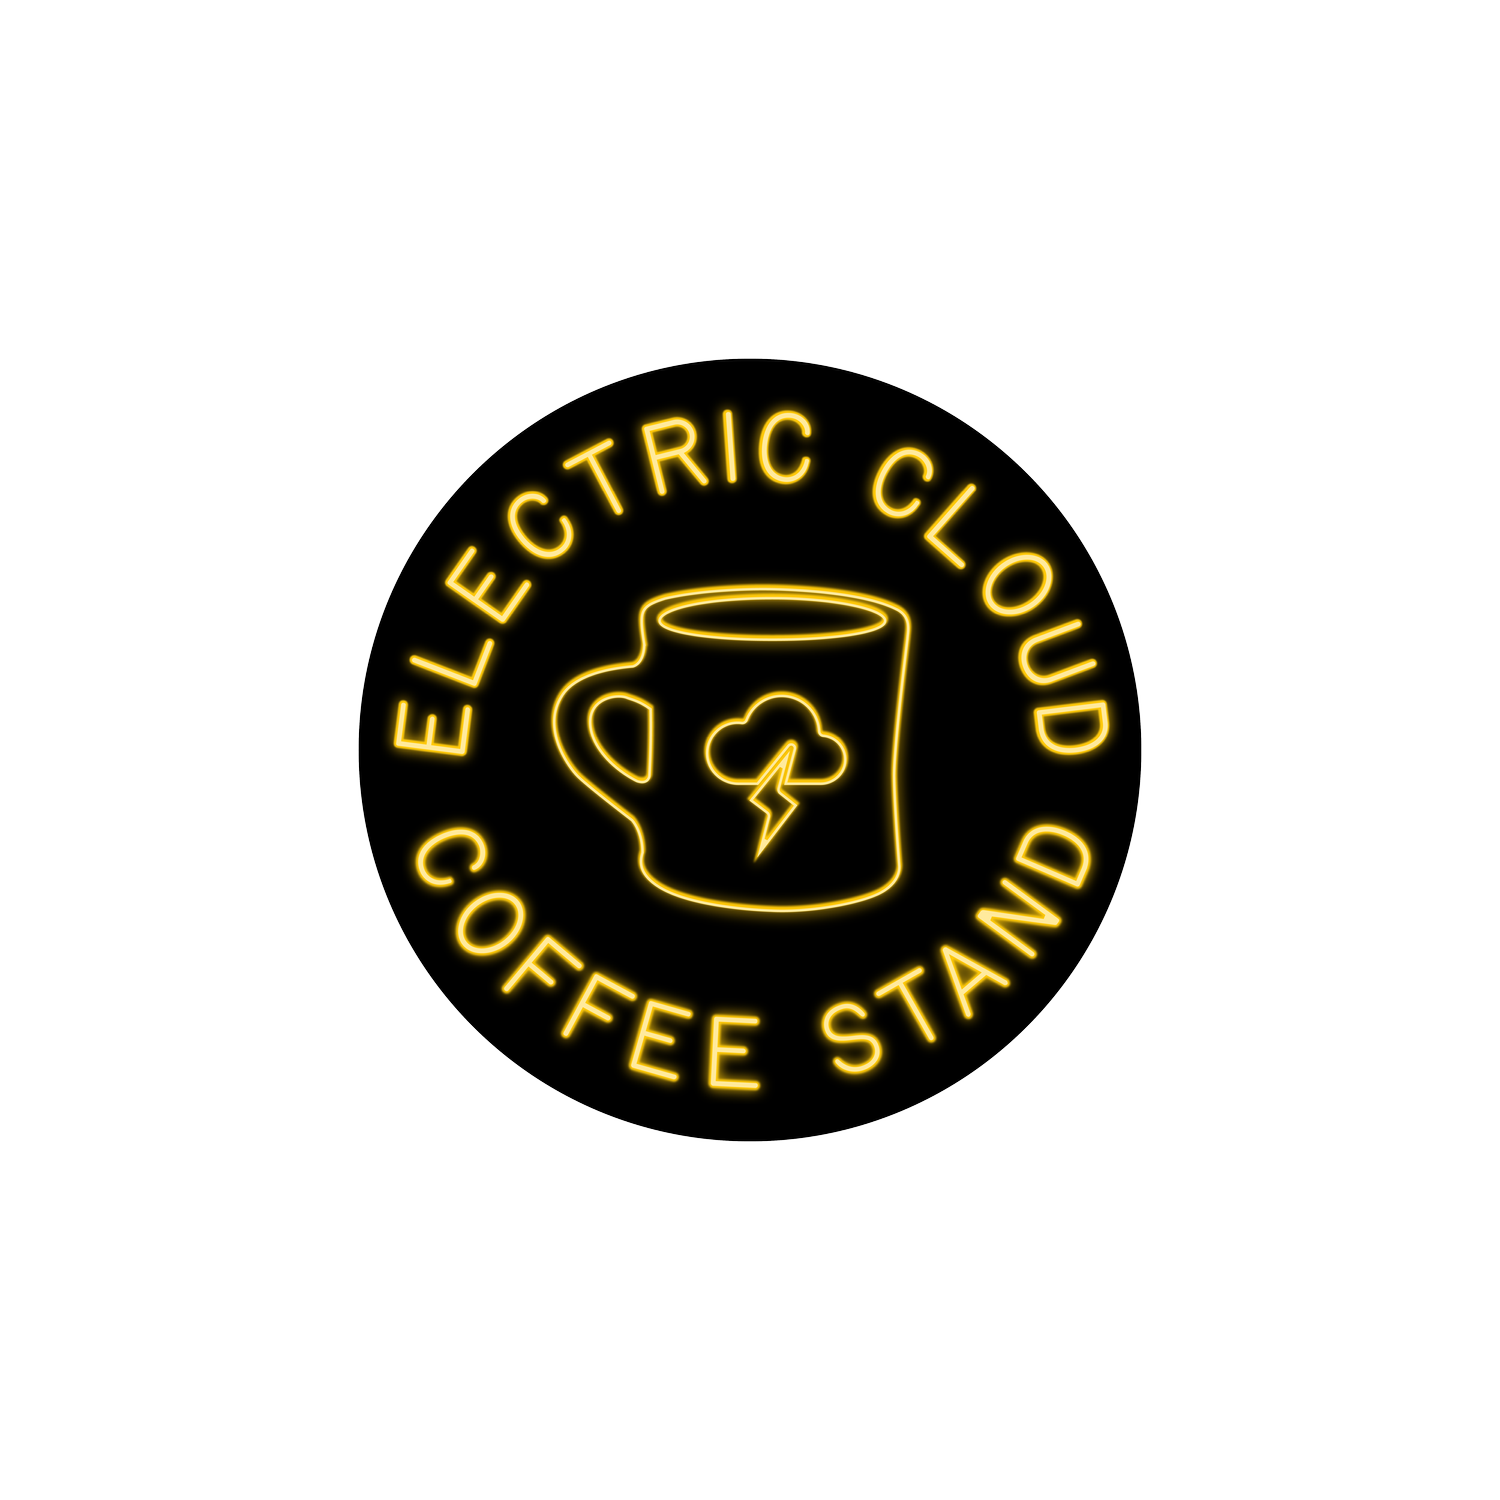 Electric Cloud Coffee Stand